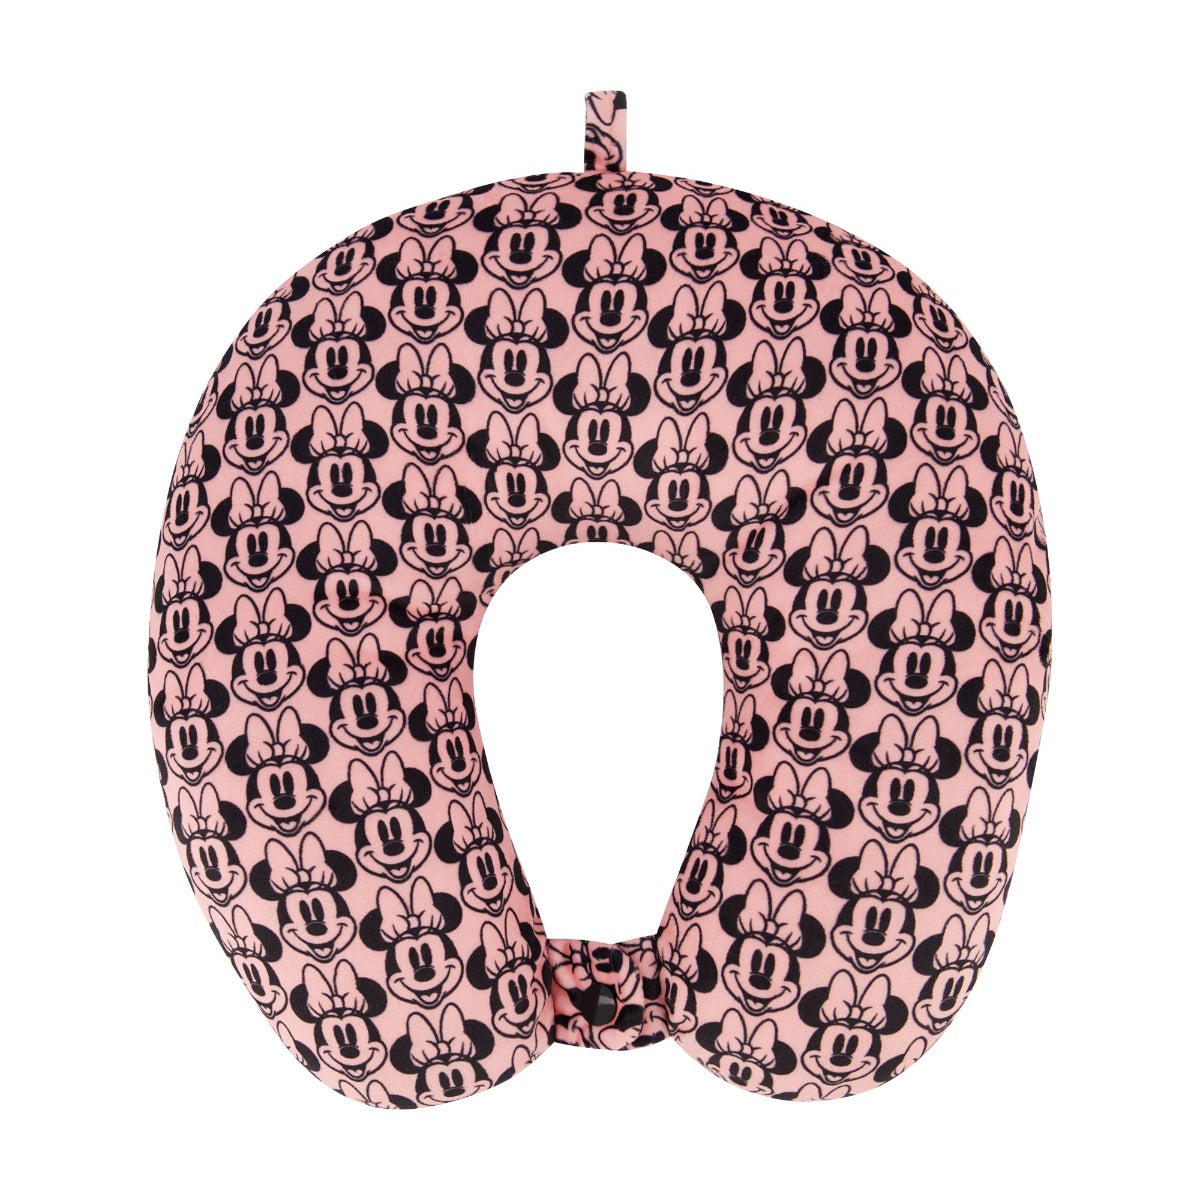 Ful disney minnie mouse neck pillow pink and black - best wrap travel pillows for adults and kids